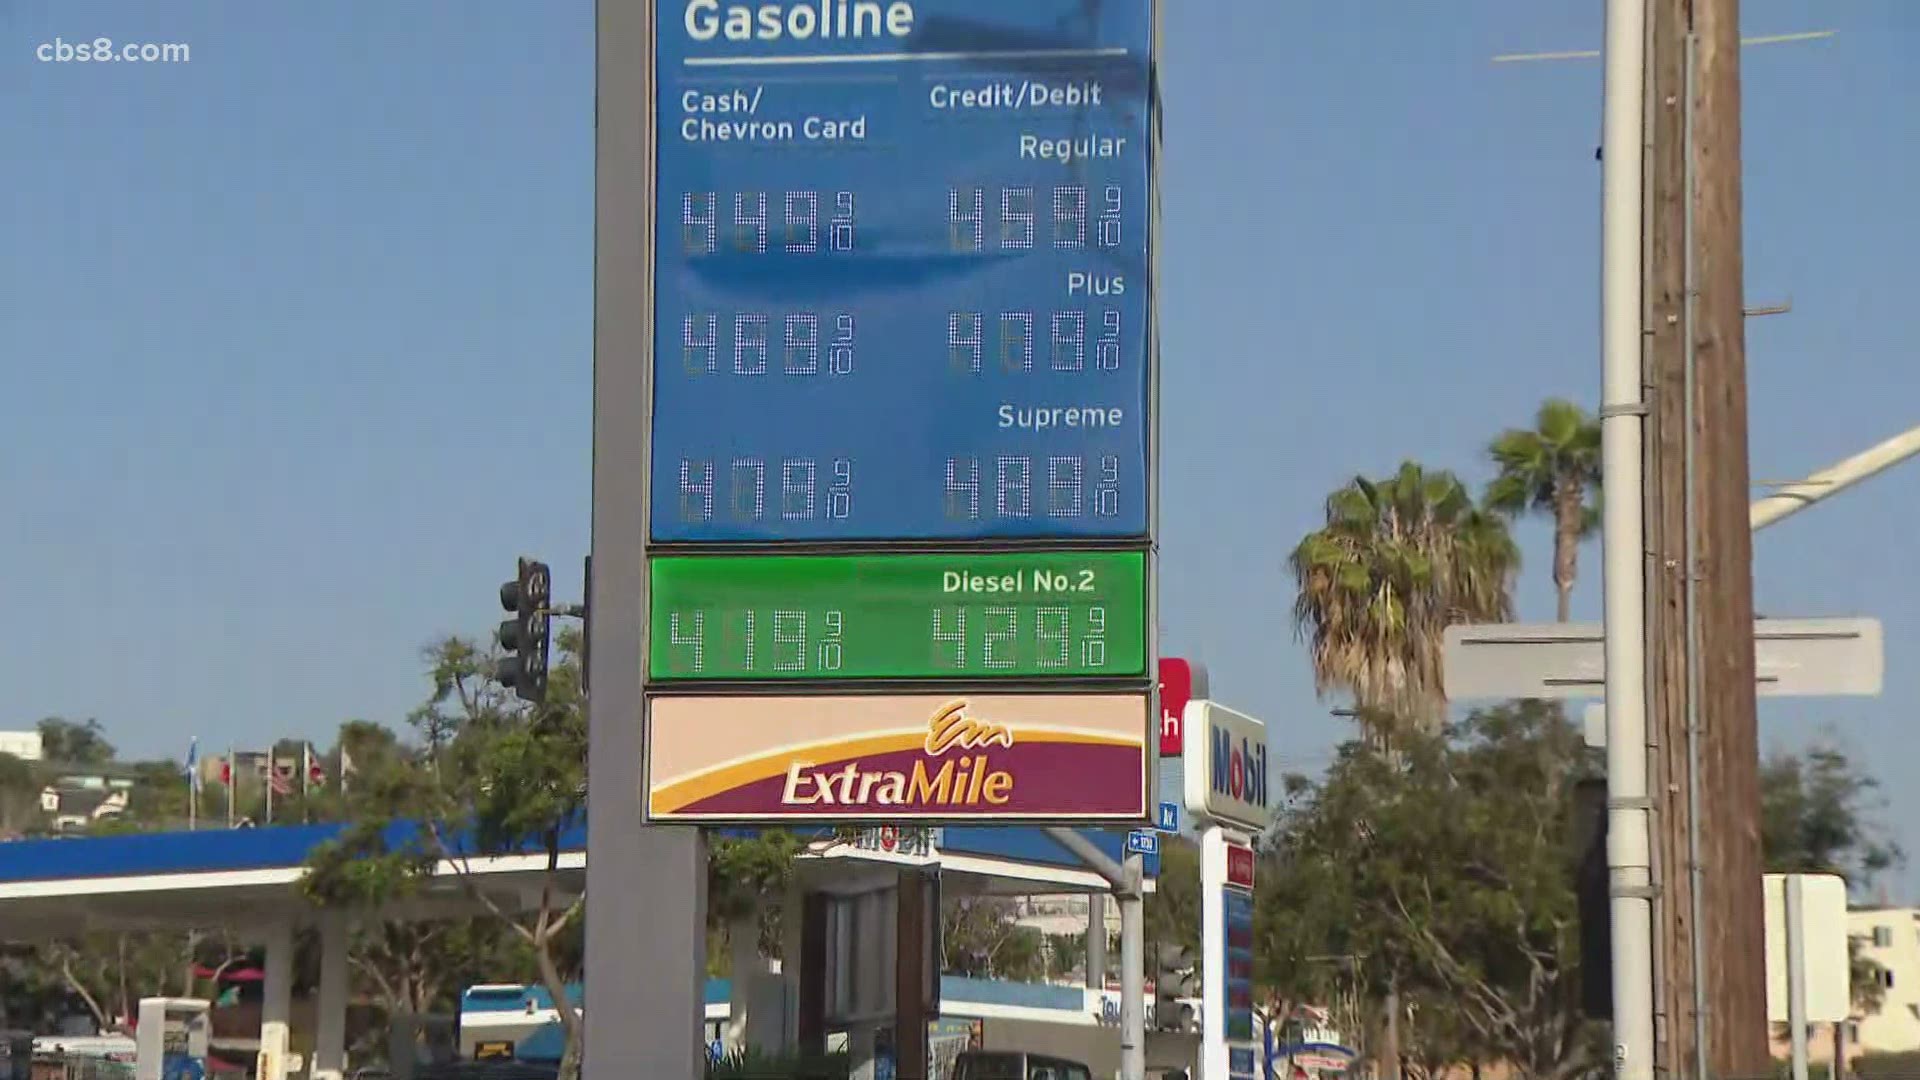 Thursday’s price jump makes California’s gas tax 51.1 cents which is the highest in the United States.